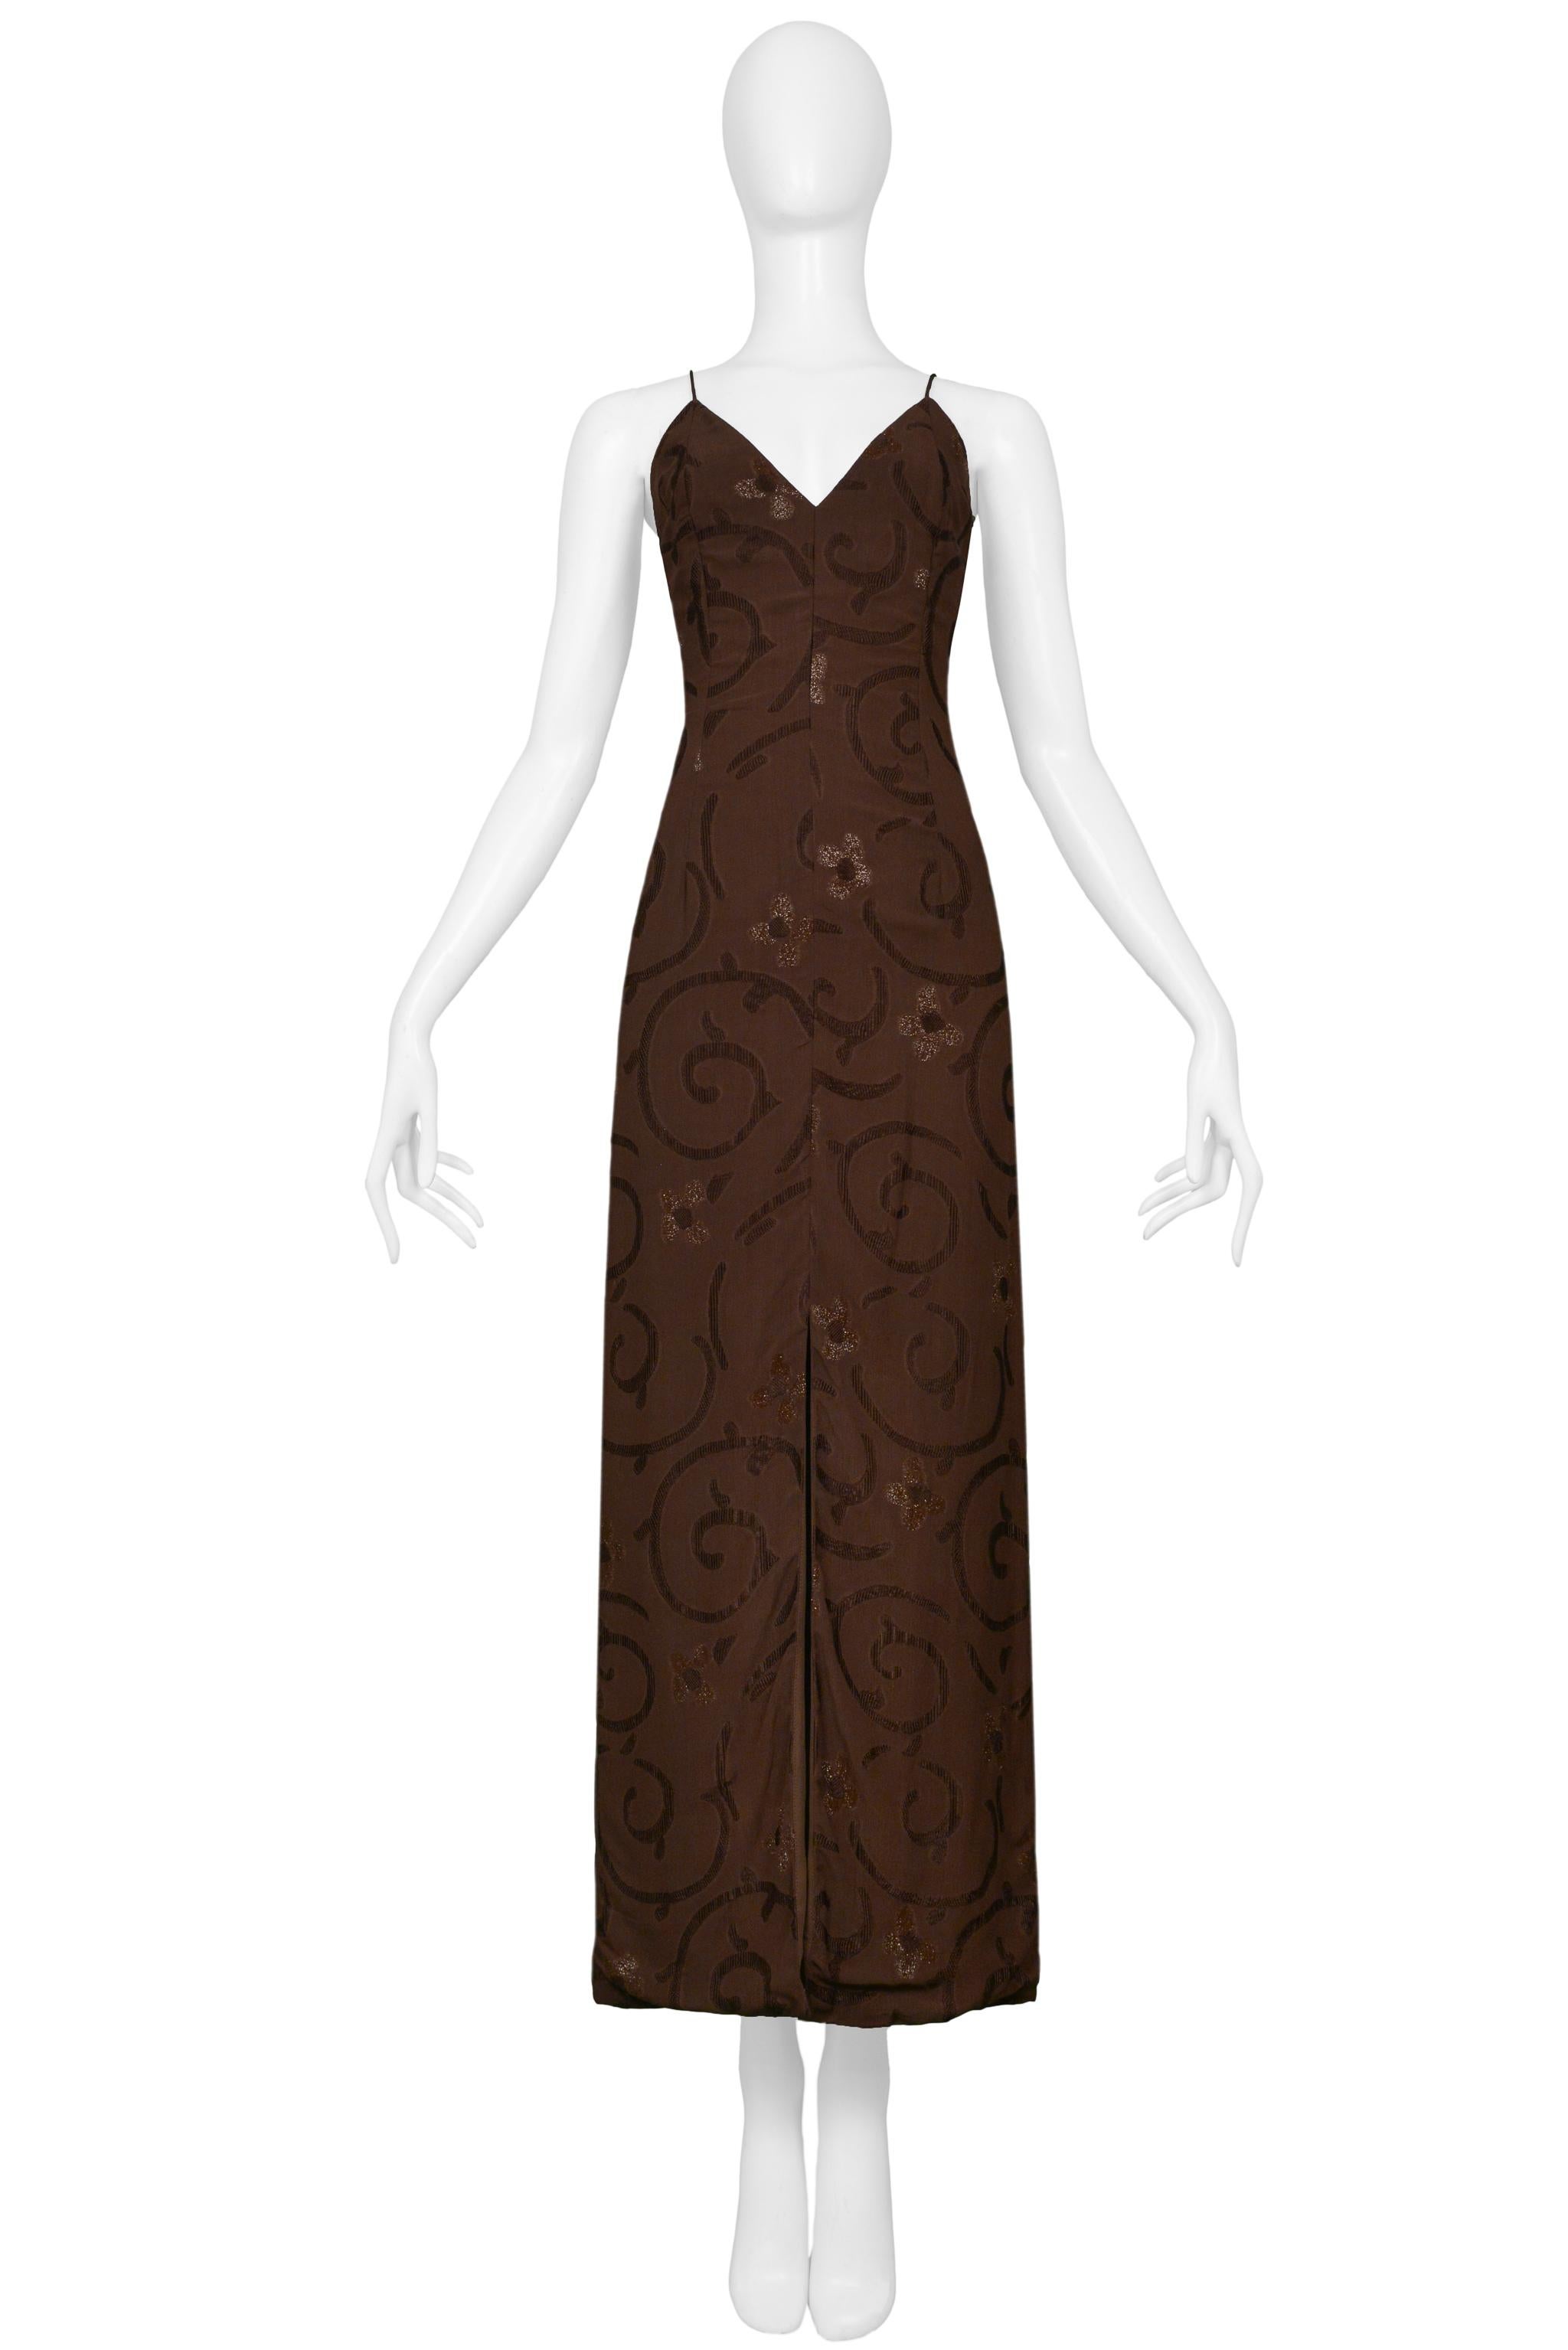 Resurrection Vintage is excited to offer a vintage Giorgio Armani gown featuring spaghetti straps, a high slit in the front, and a swirl floral design.

Giorgio Armani
1997 Collection 
Size: 42
95% Viscose, 5% Polyamide
Excellent Vintage